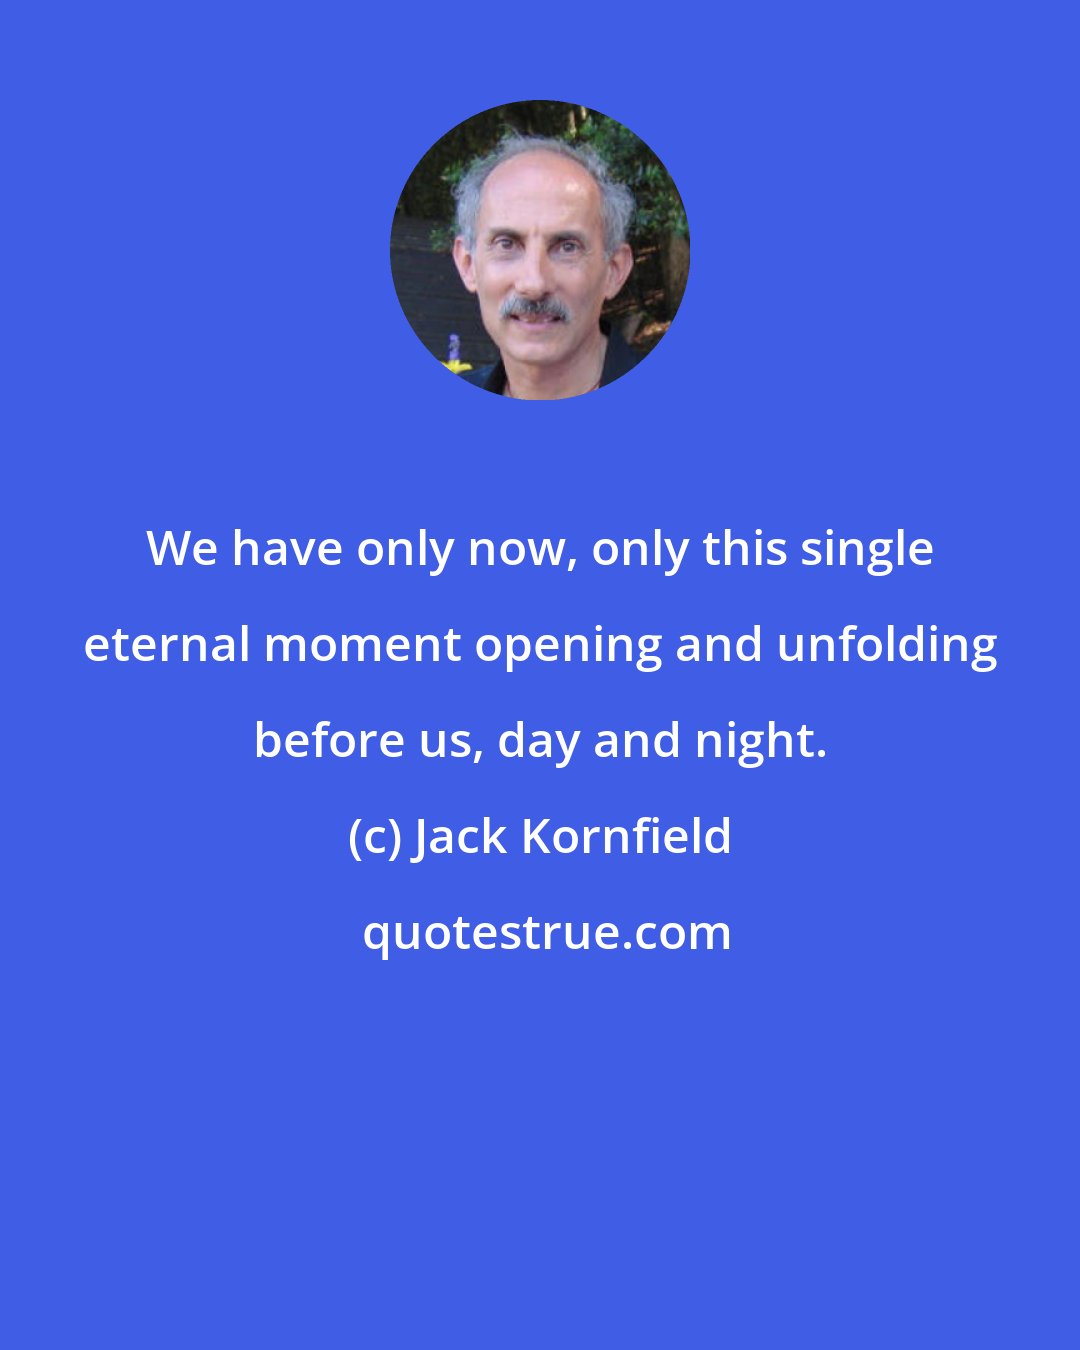 Jack Kornfield: We have only now, only this single eternal moment opening and unfolding before us, day and night.